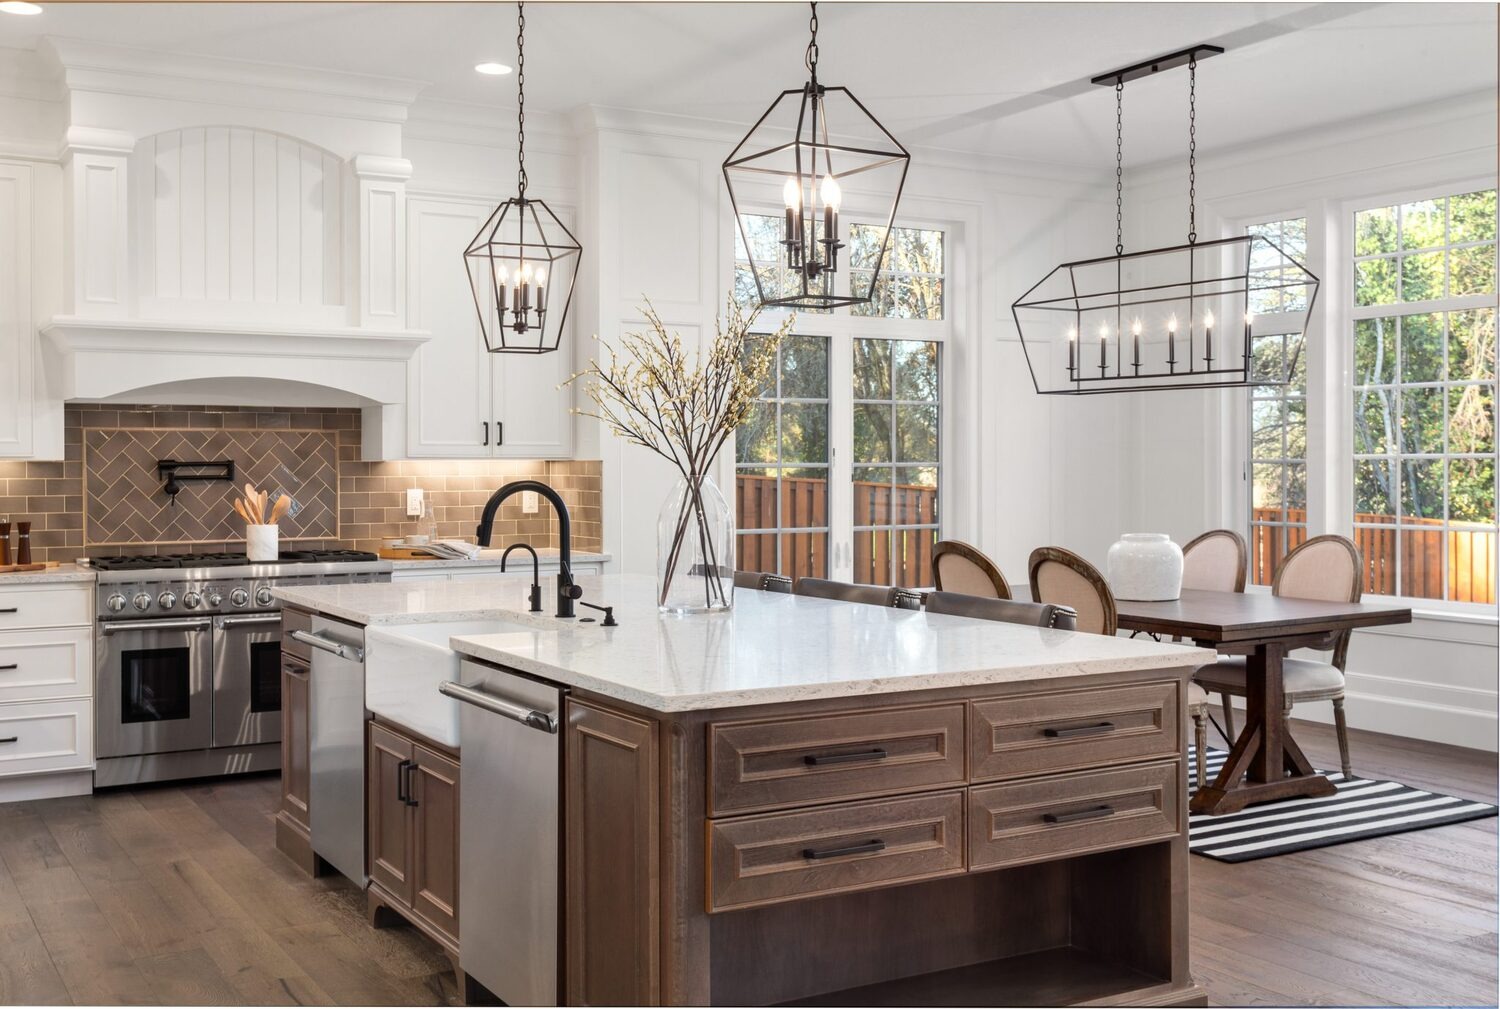 The kitchen remodeling Northbrook project created a stunning traditional kitchen